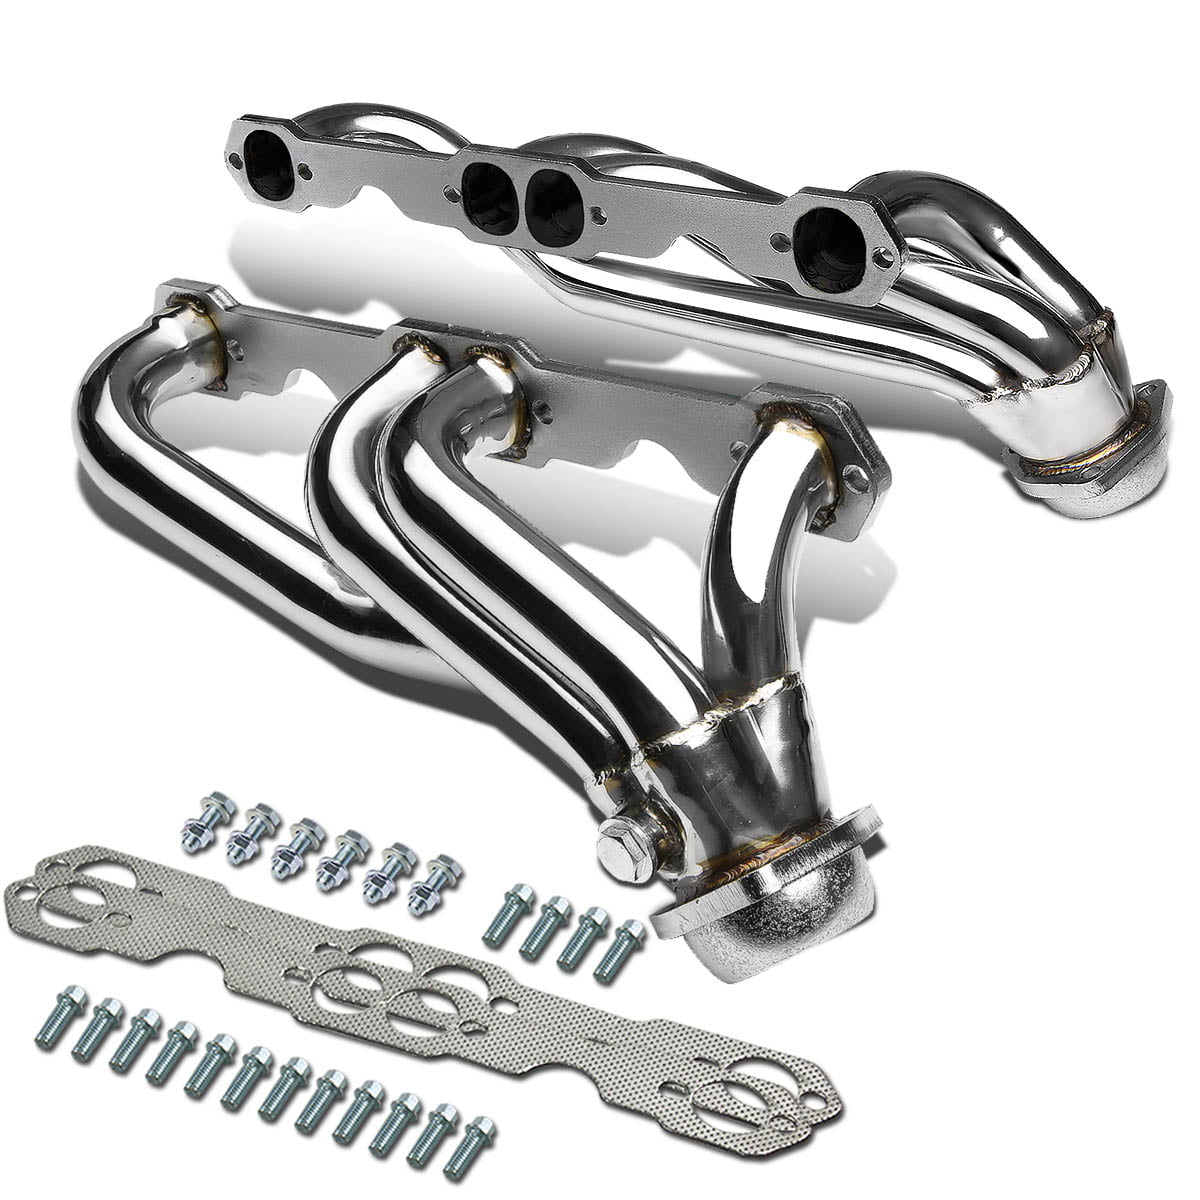 Stainless Header Exhaust Manifold Fit For 1988 1989 1990-1997 CHEVY/GMC C/K Truck 5.0L/5.7L HDSGMC85T2 